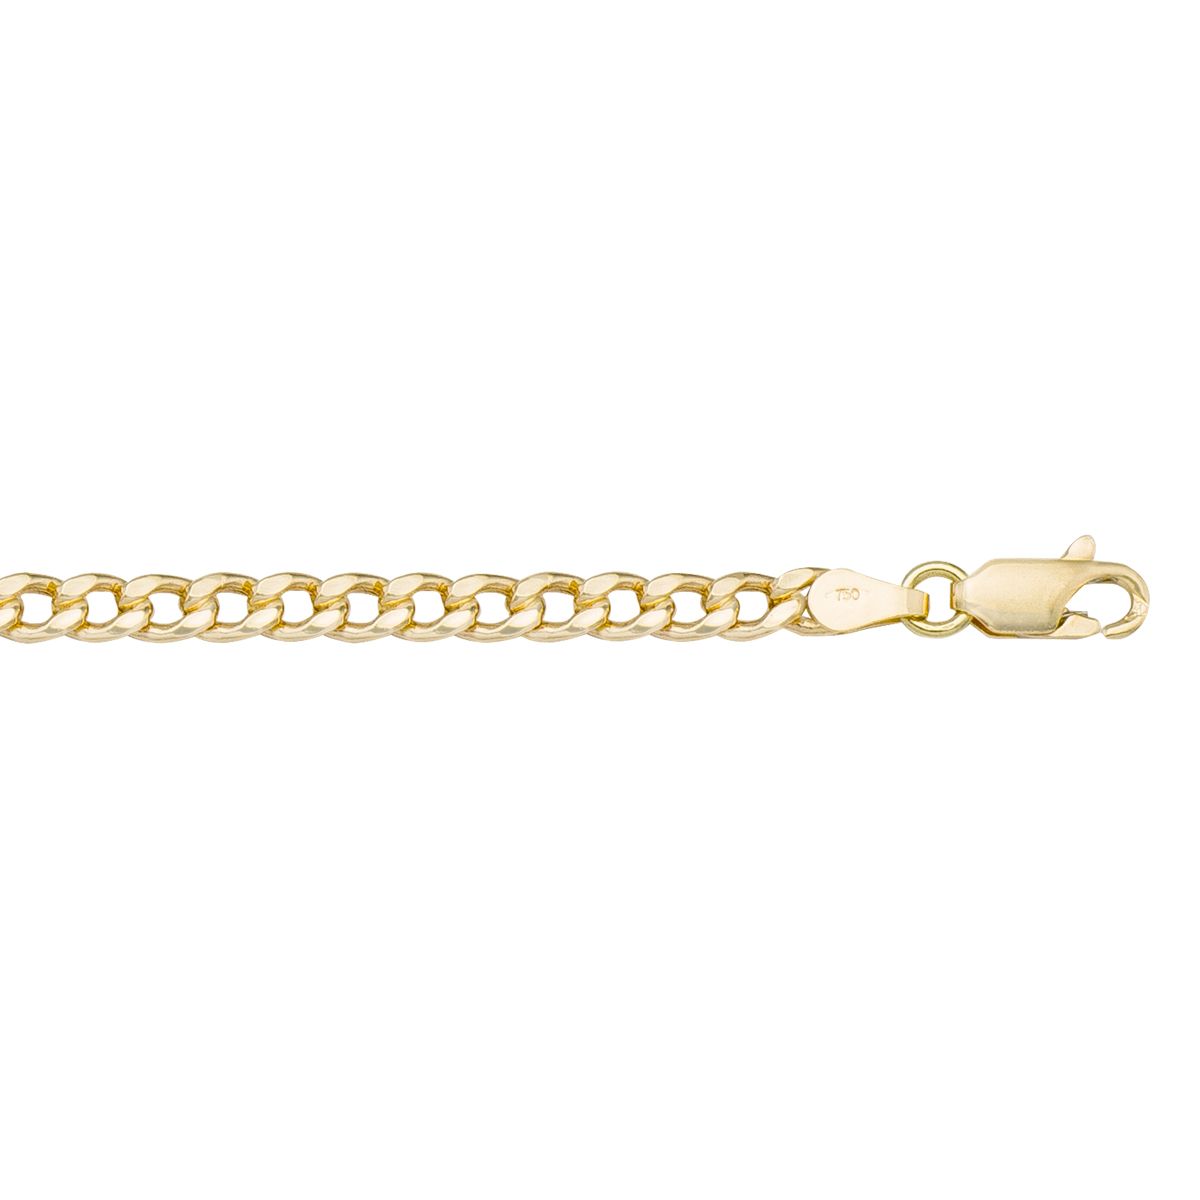 CCRB03, Gold Bracelet, Hollow Curb, Yellow Gold